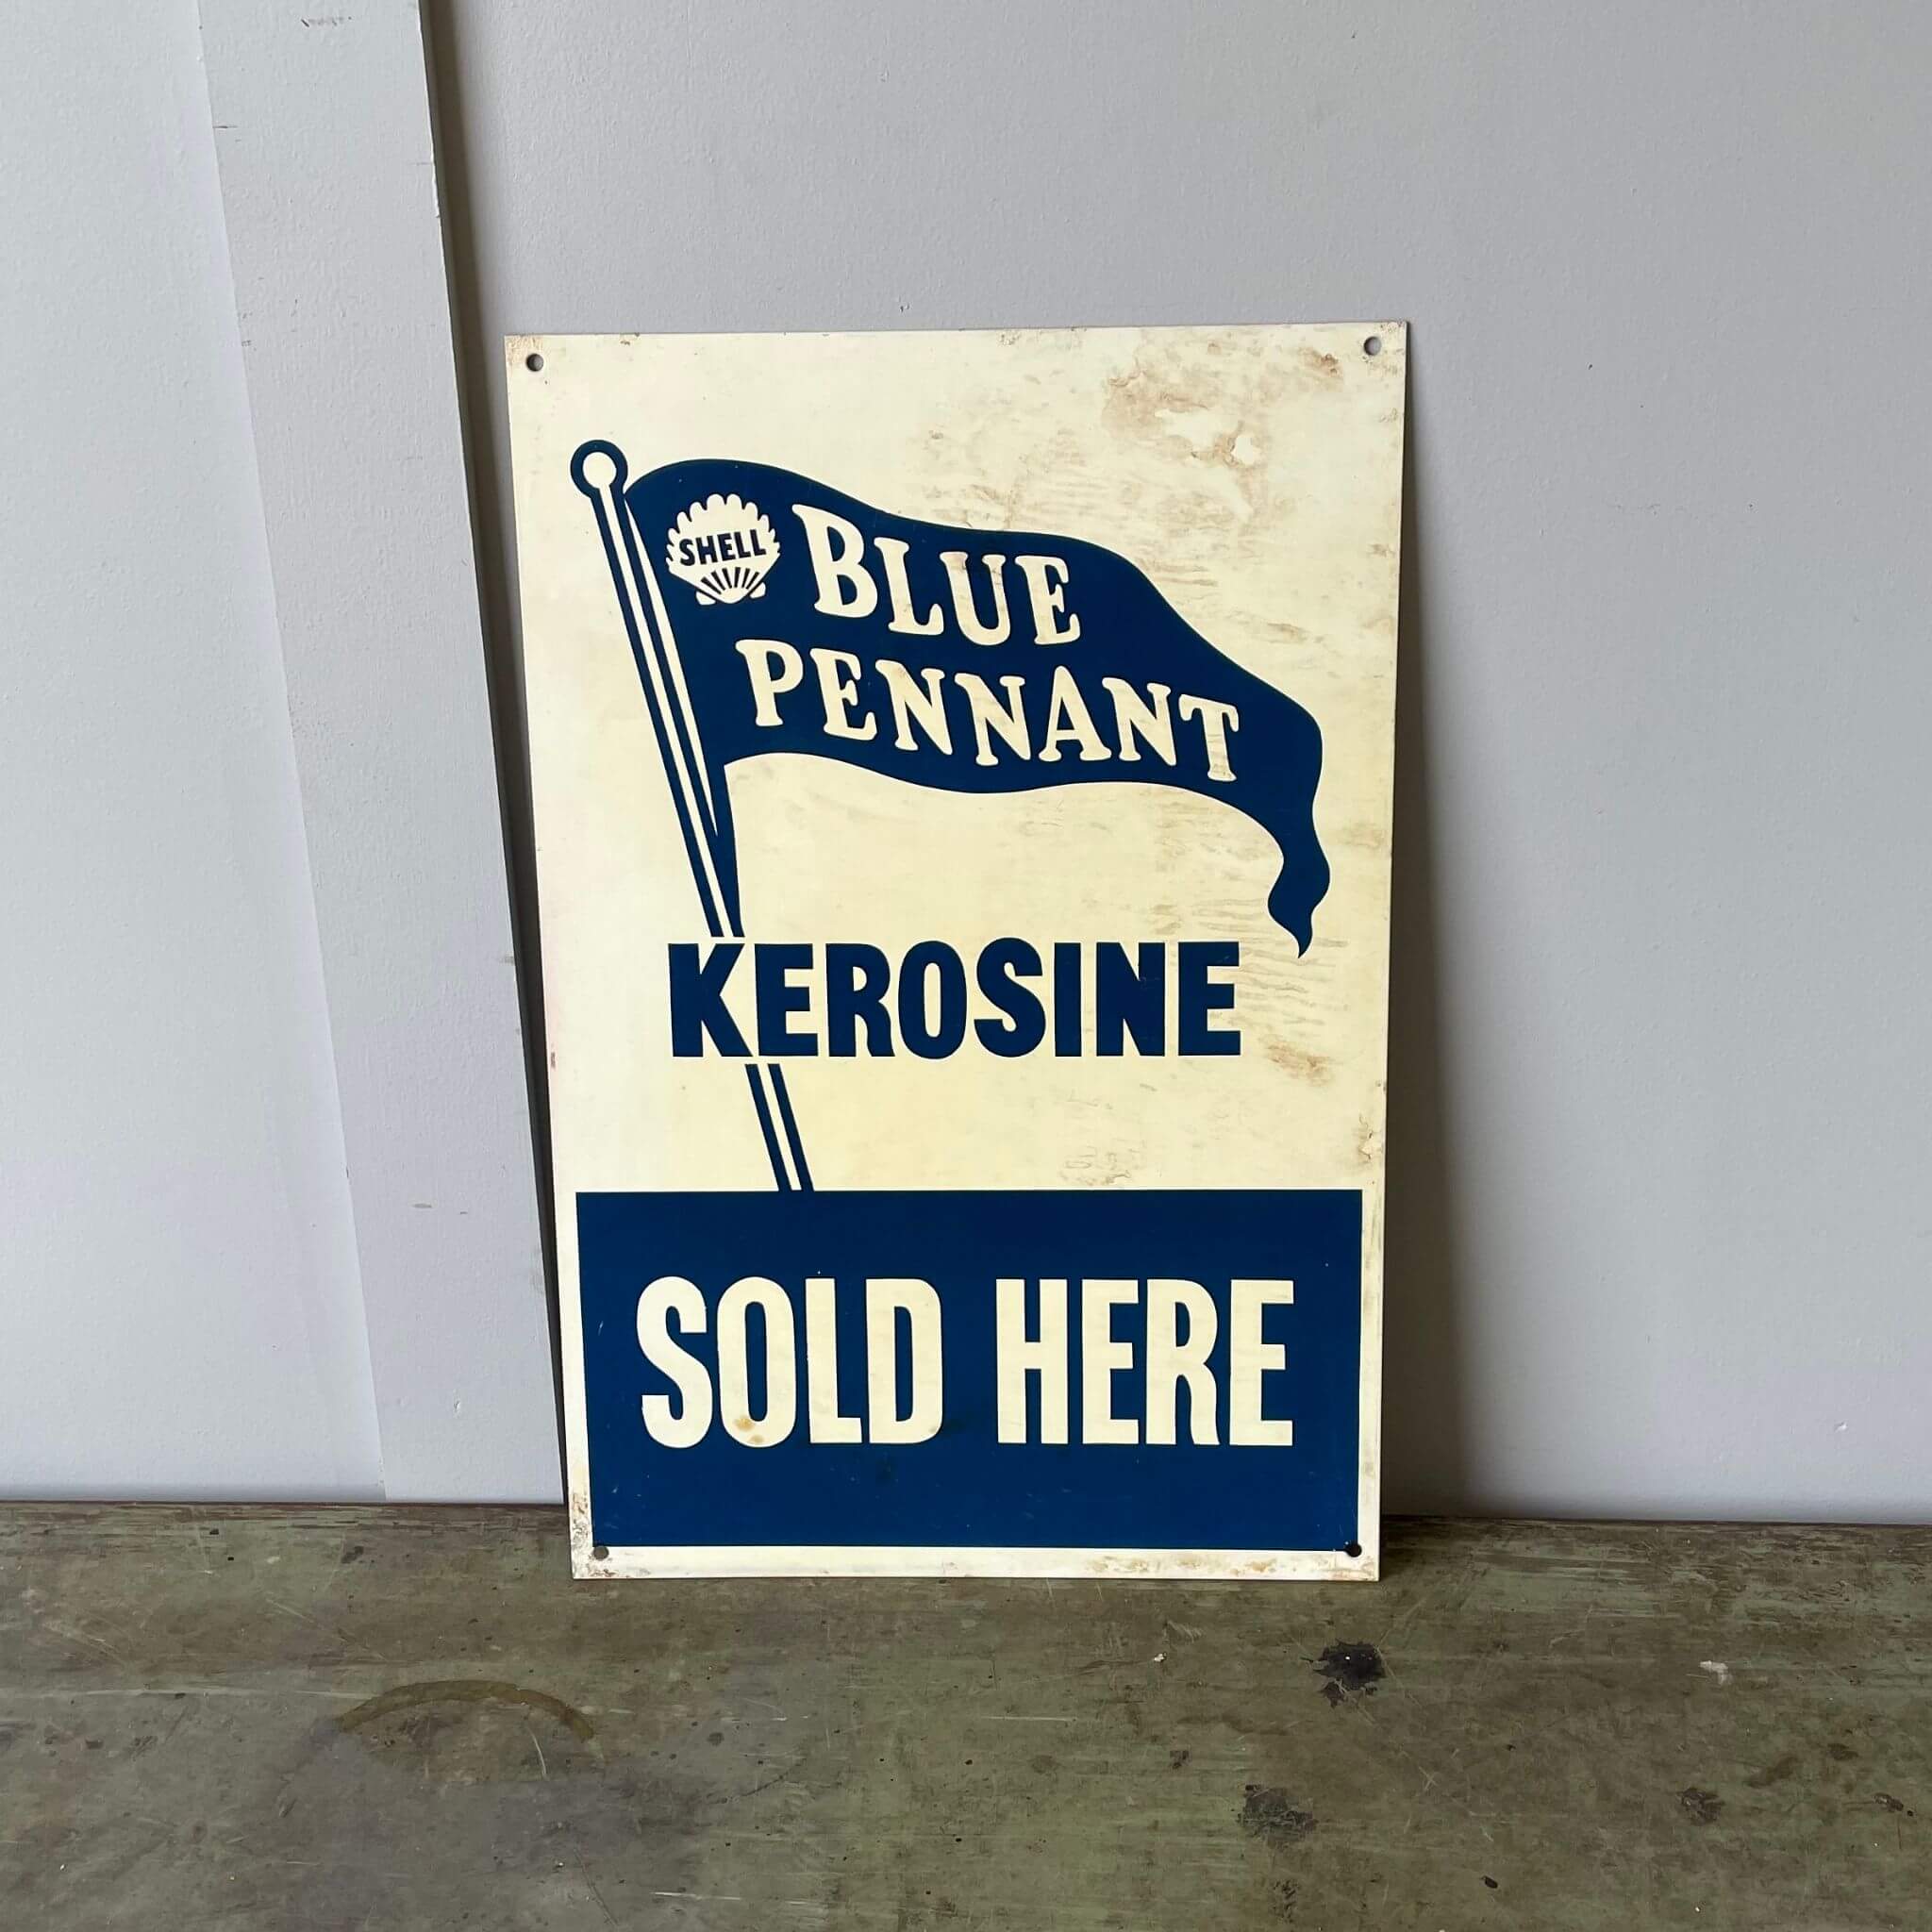 Antique and collectible sign Shell Blue Pennant